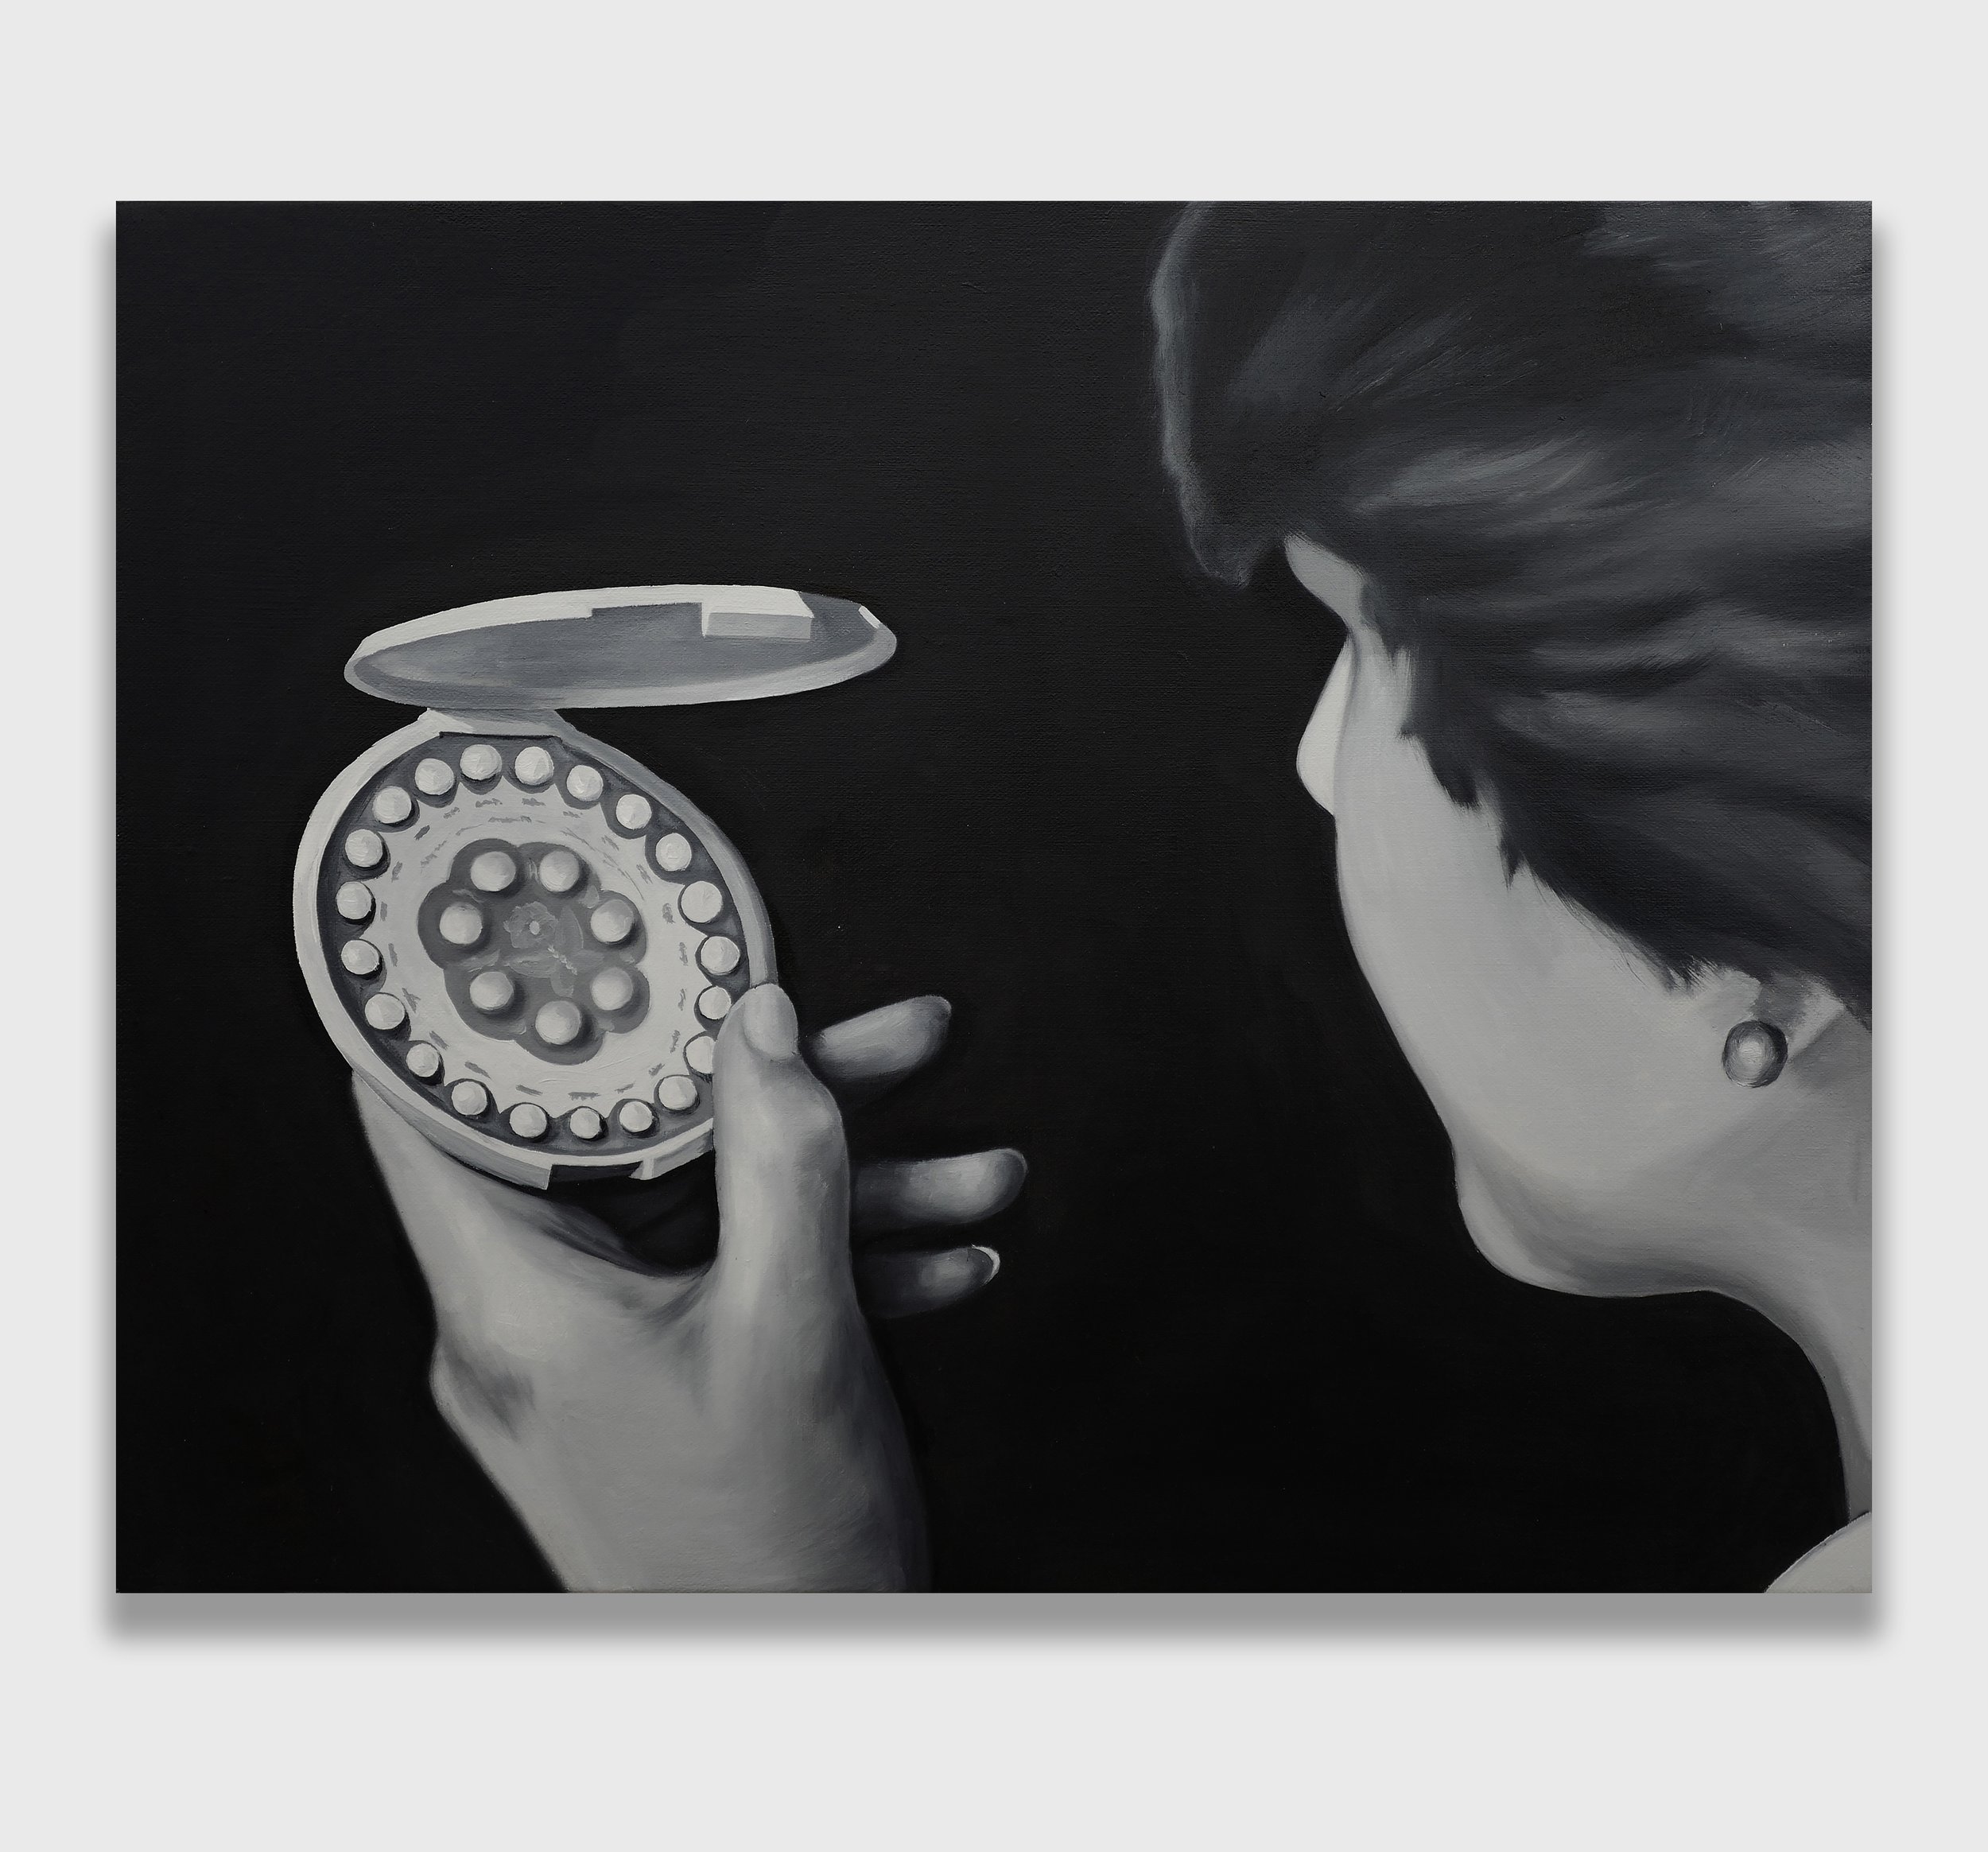   The Pill,  2021  Oil on linen  16 x 20 inches / 40.6 x 50.8 cm 